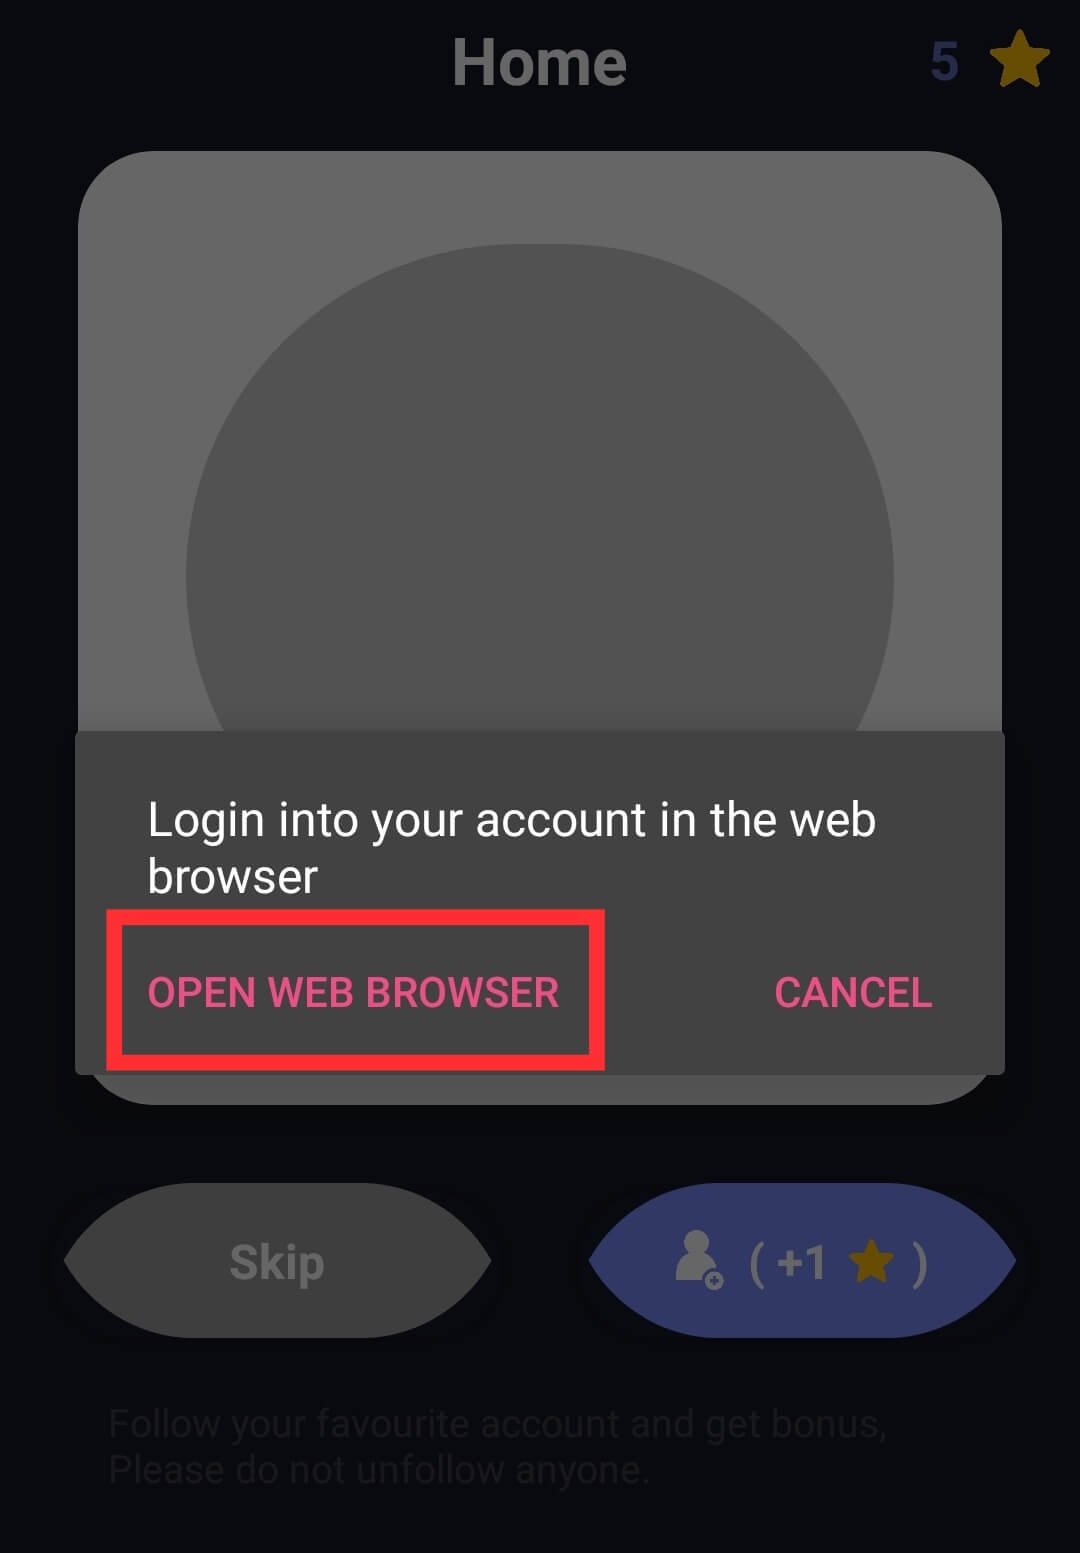 Open Web Browser